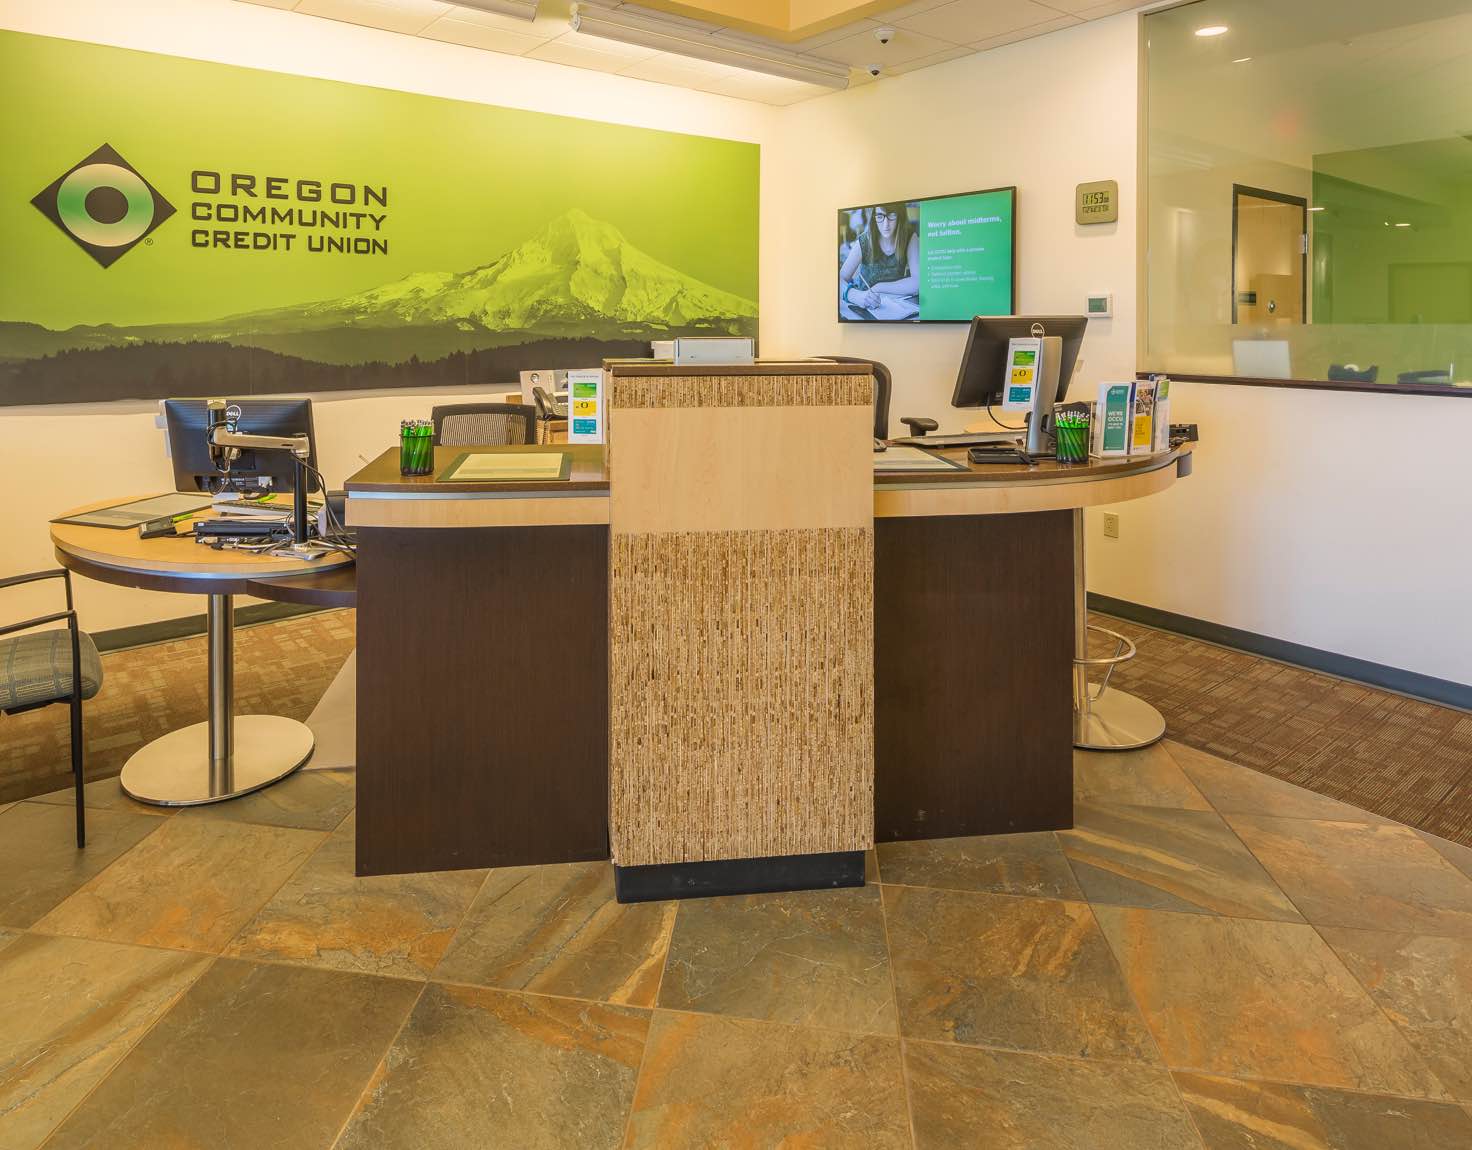 A wooden desk in a bank with a green sign behind it displaying a mountain range.